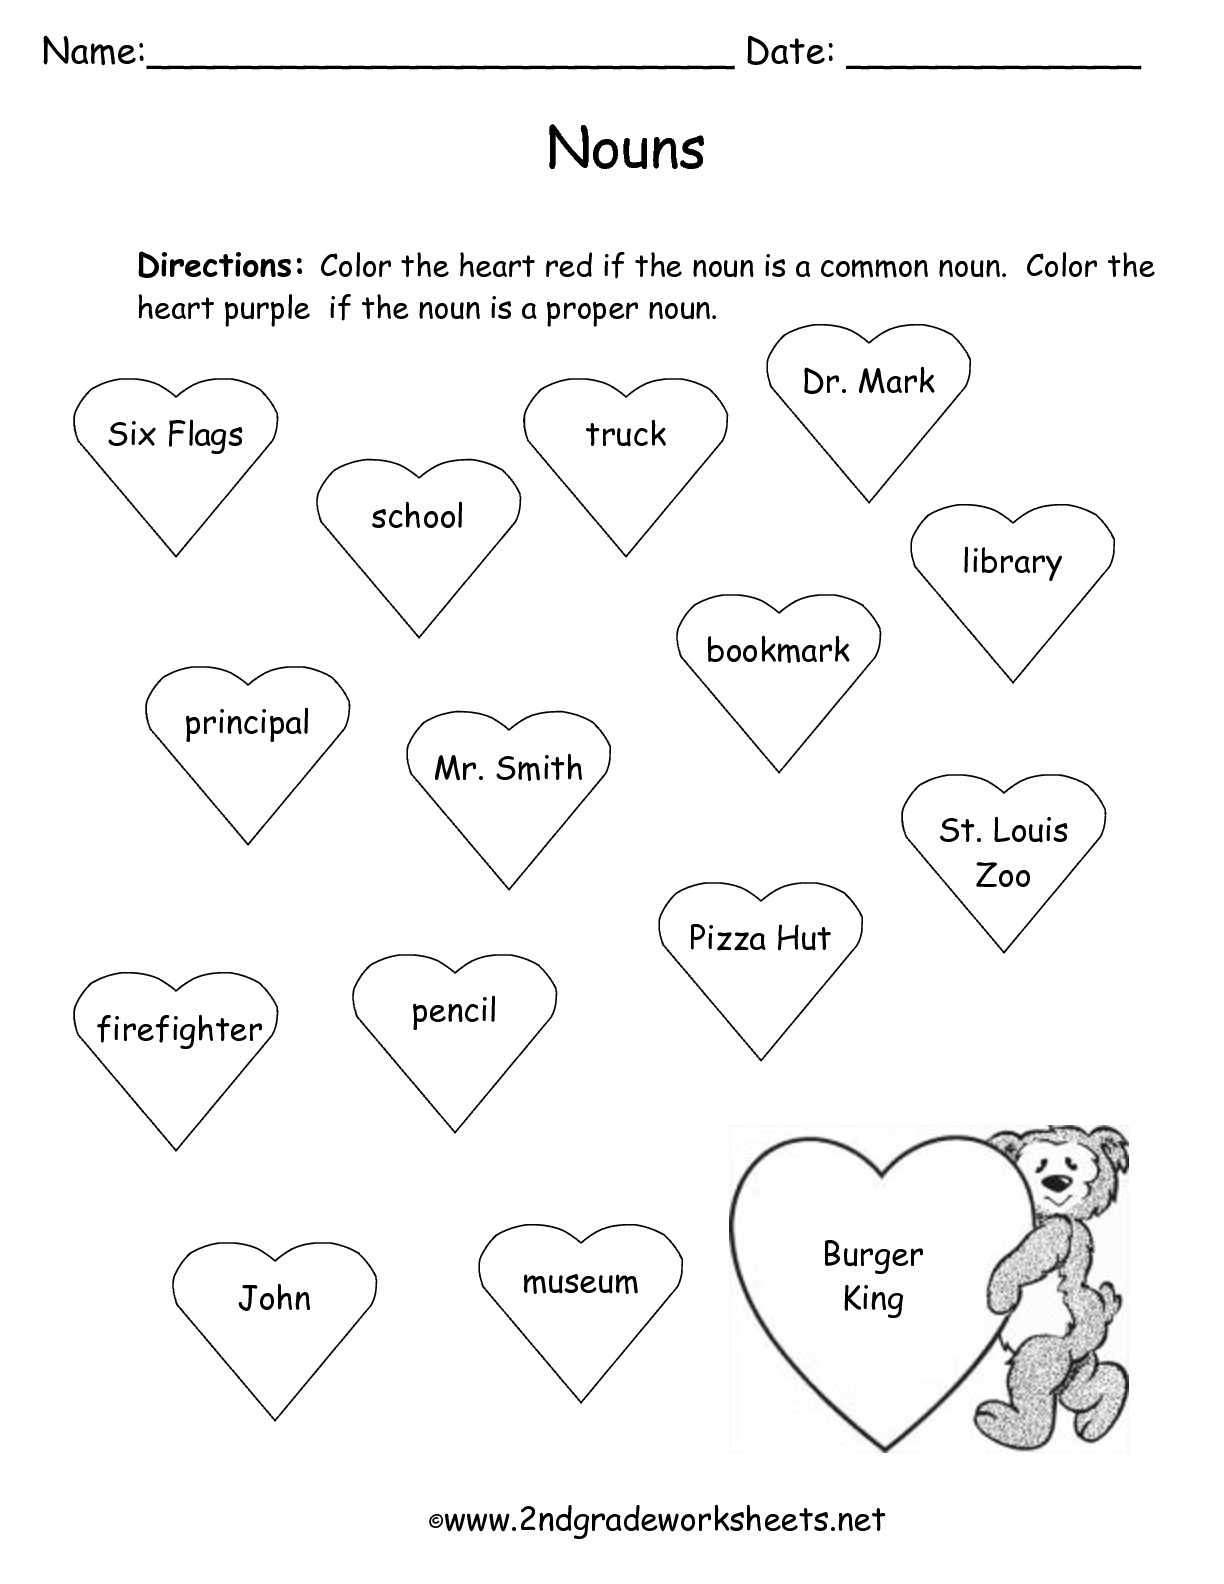 hot-free-valentine-s-day-worksheets